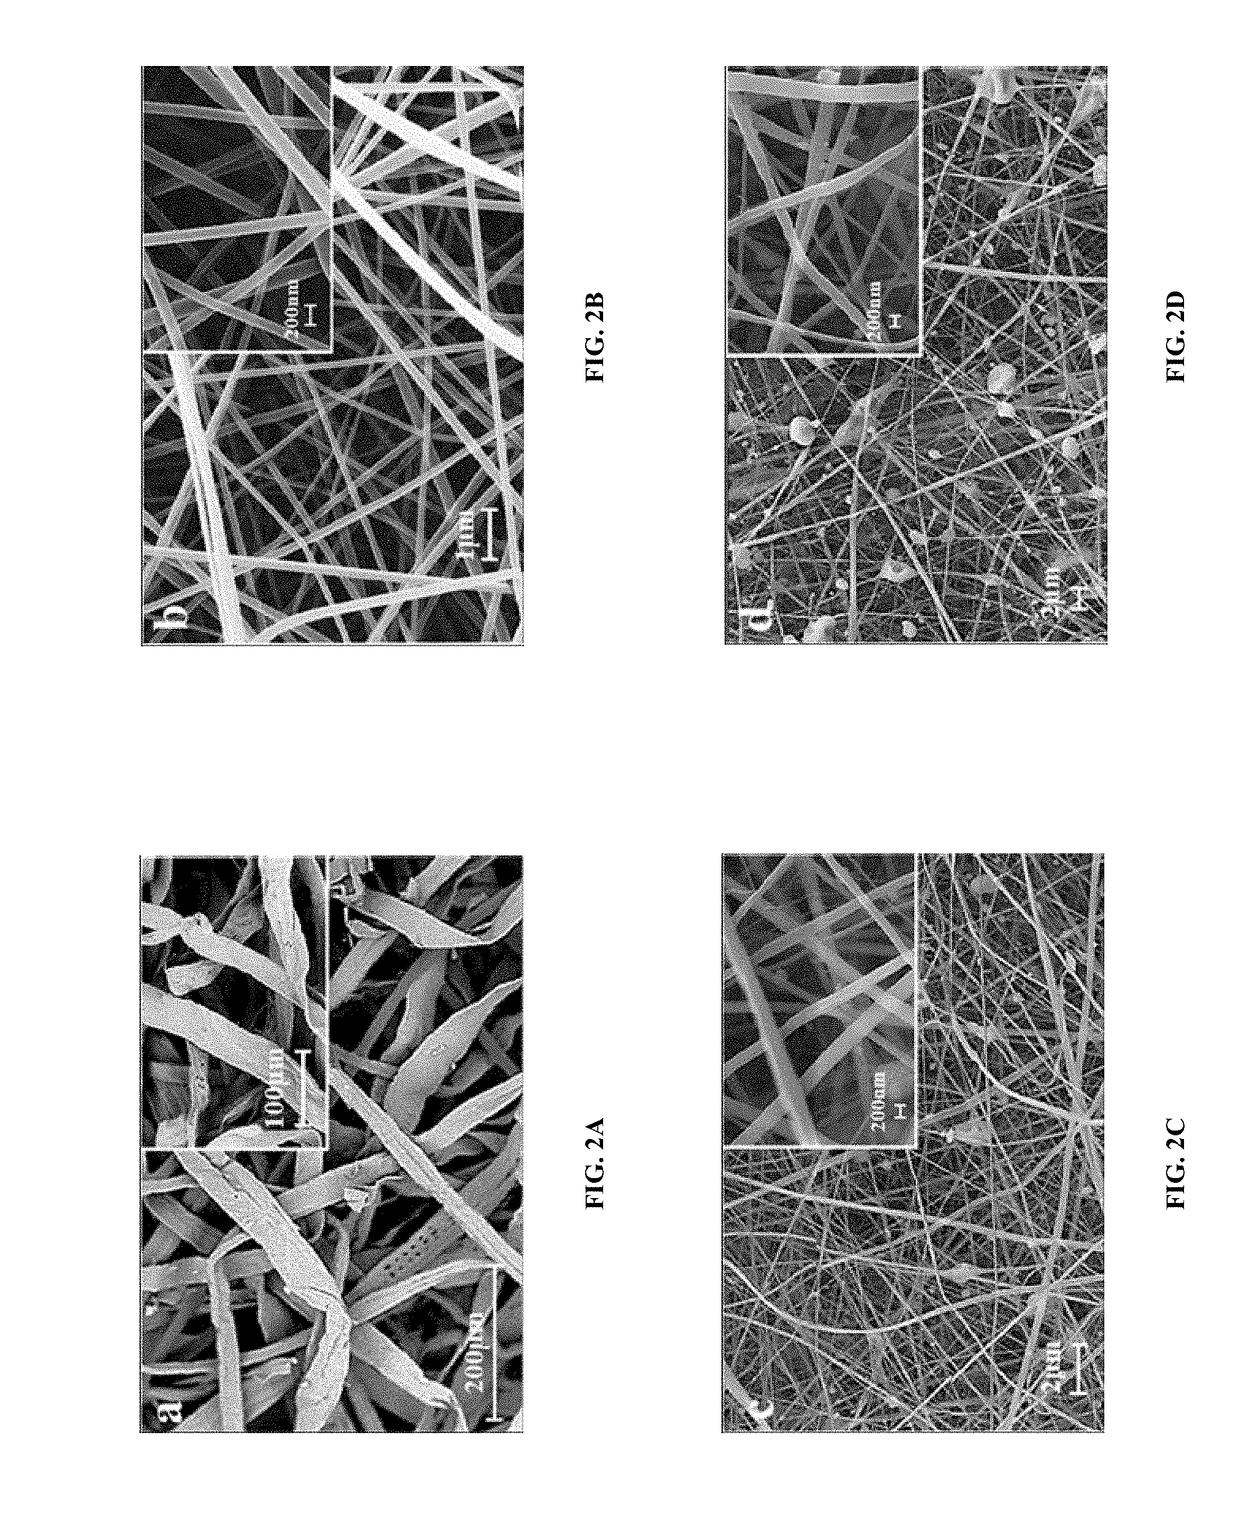 Cellulose acetate based non-woven nanofiber matrix with high absorbency properties for female hygiene products